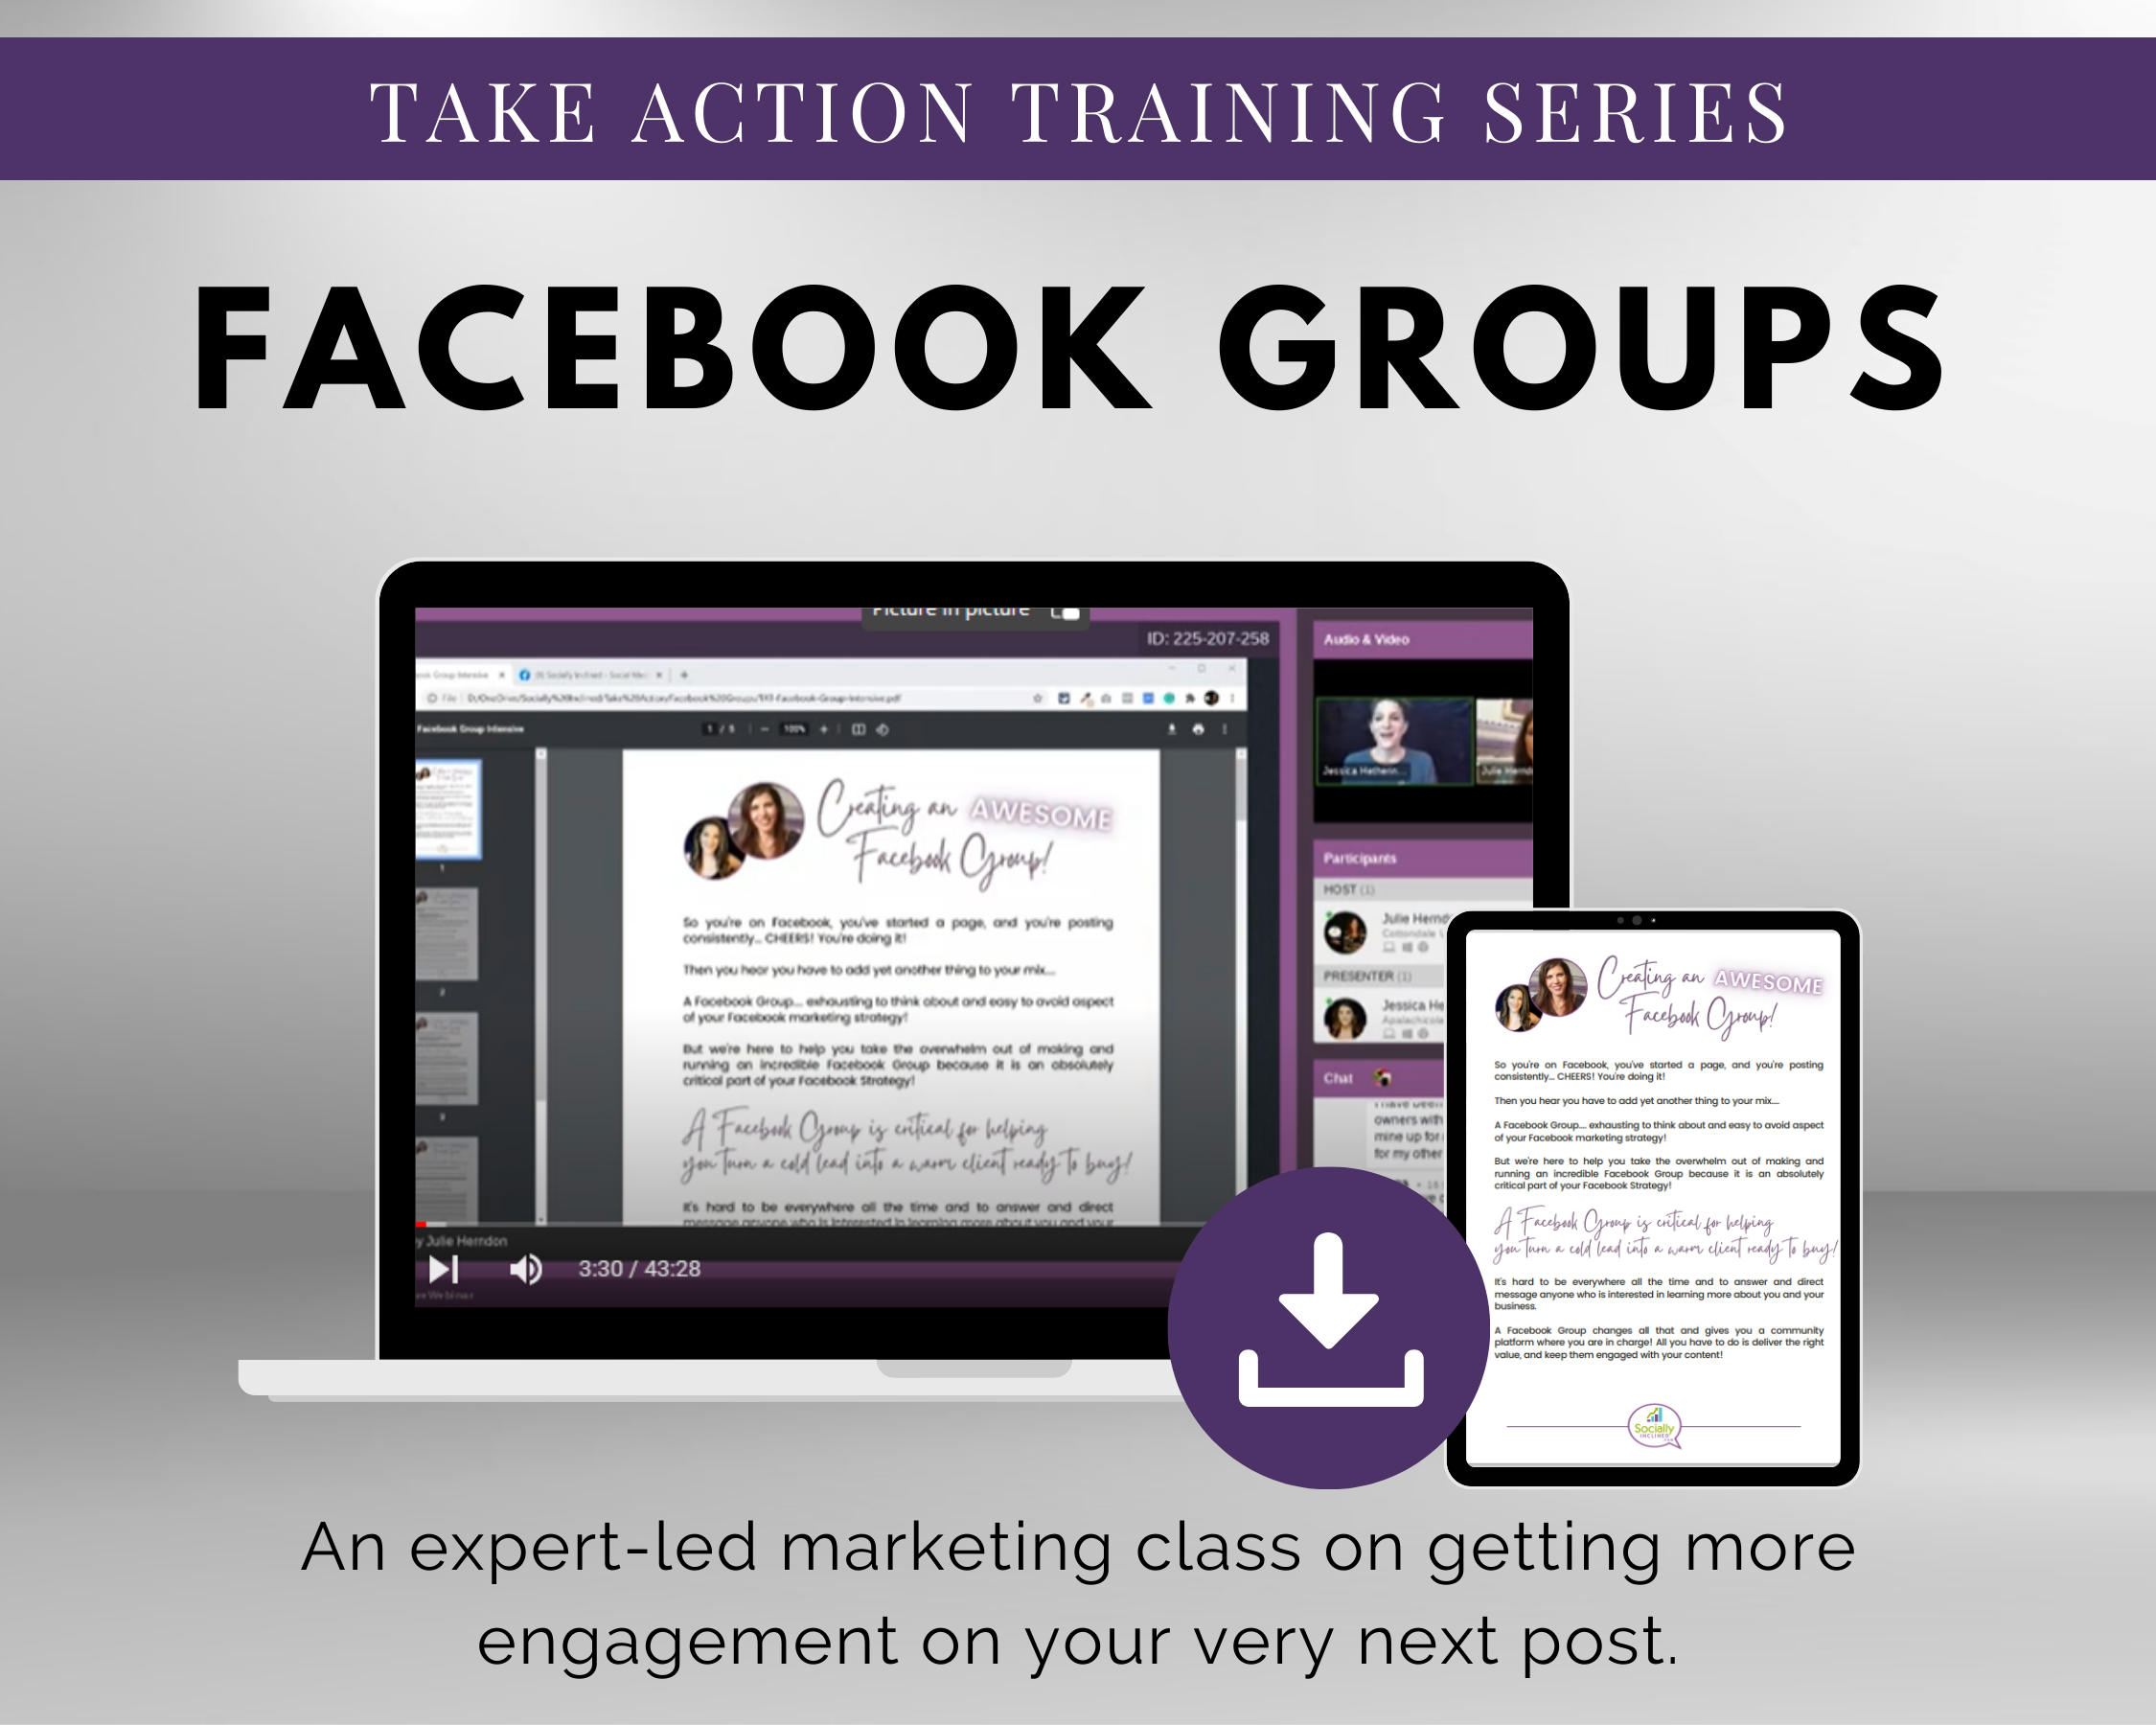 Introducing the TAT - Facebook Groups Masterclass by Get Socially Inclined, a comprehensive platform for empowering individuals to learn and grow. These groups offer invaluable resources, expert guidance, and a supportive community to help you take action.